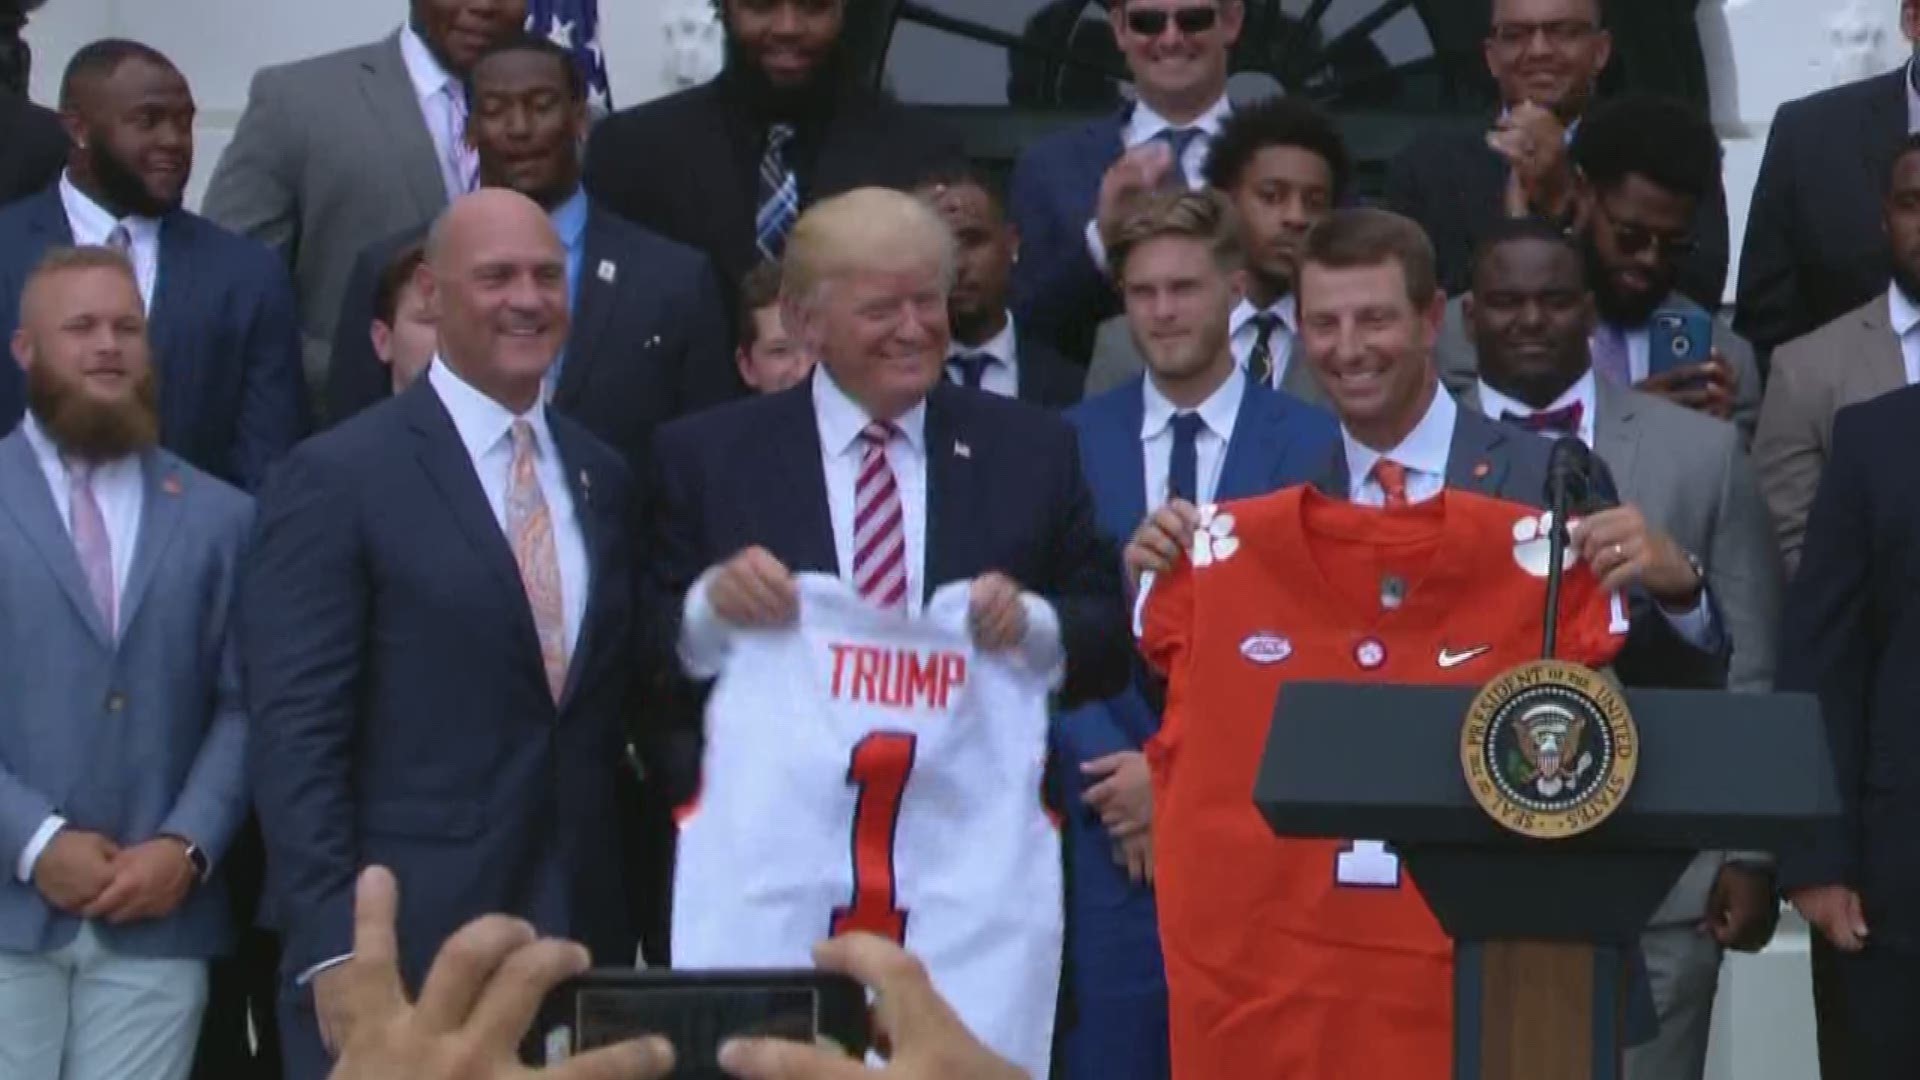 Houston Texans quarterback Deshaun Watson was at the White House Monday with his 2016 National Champion Clemson Tigers for a ceremony honoring the team.